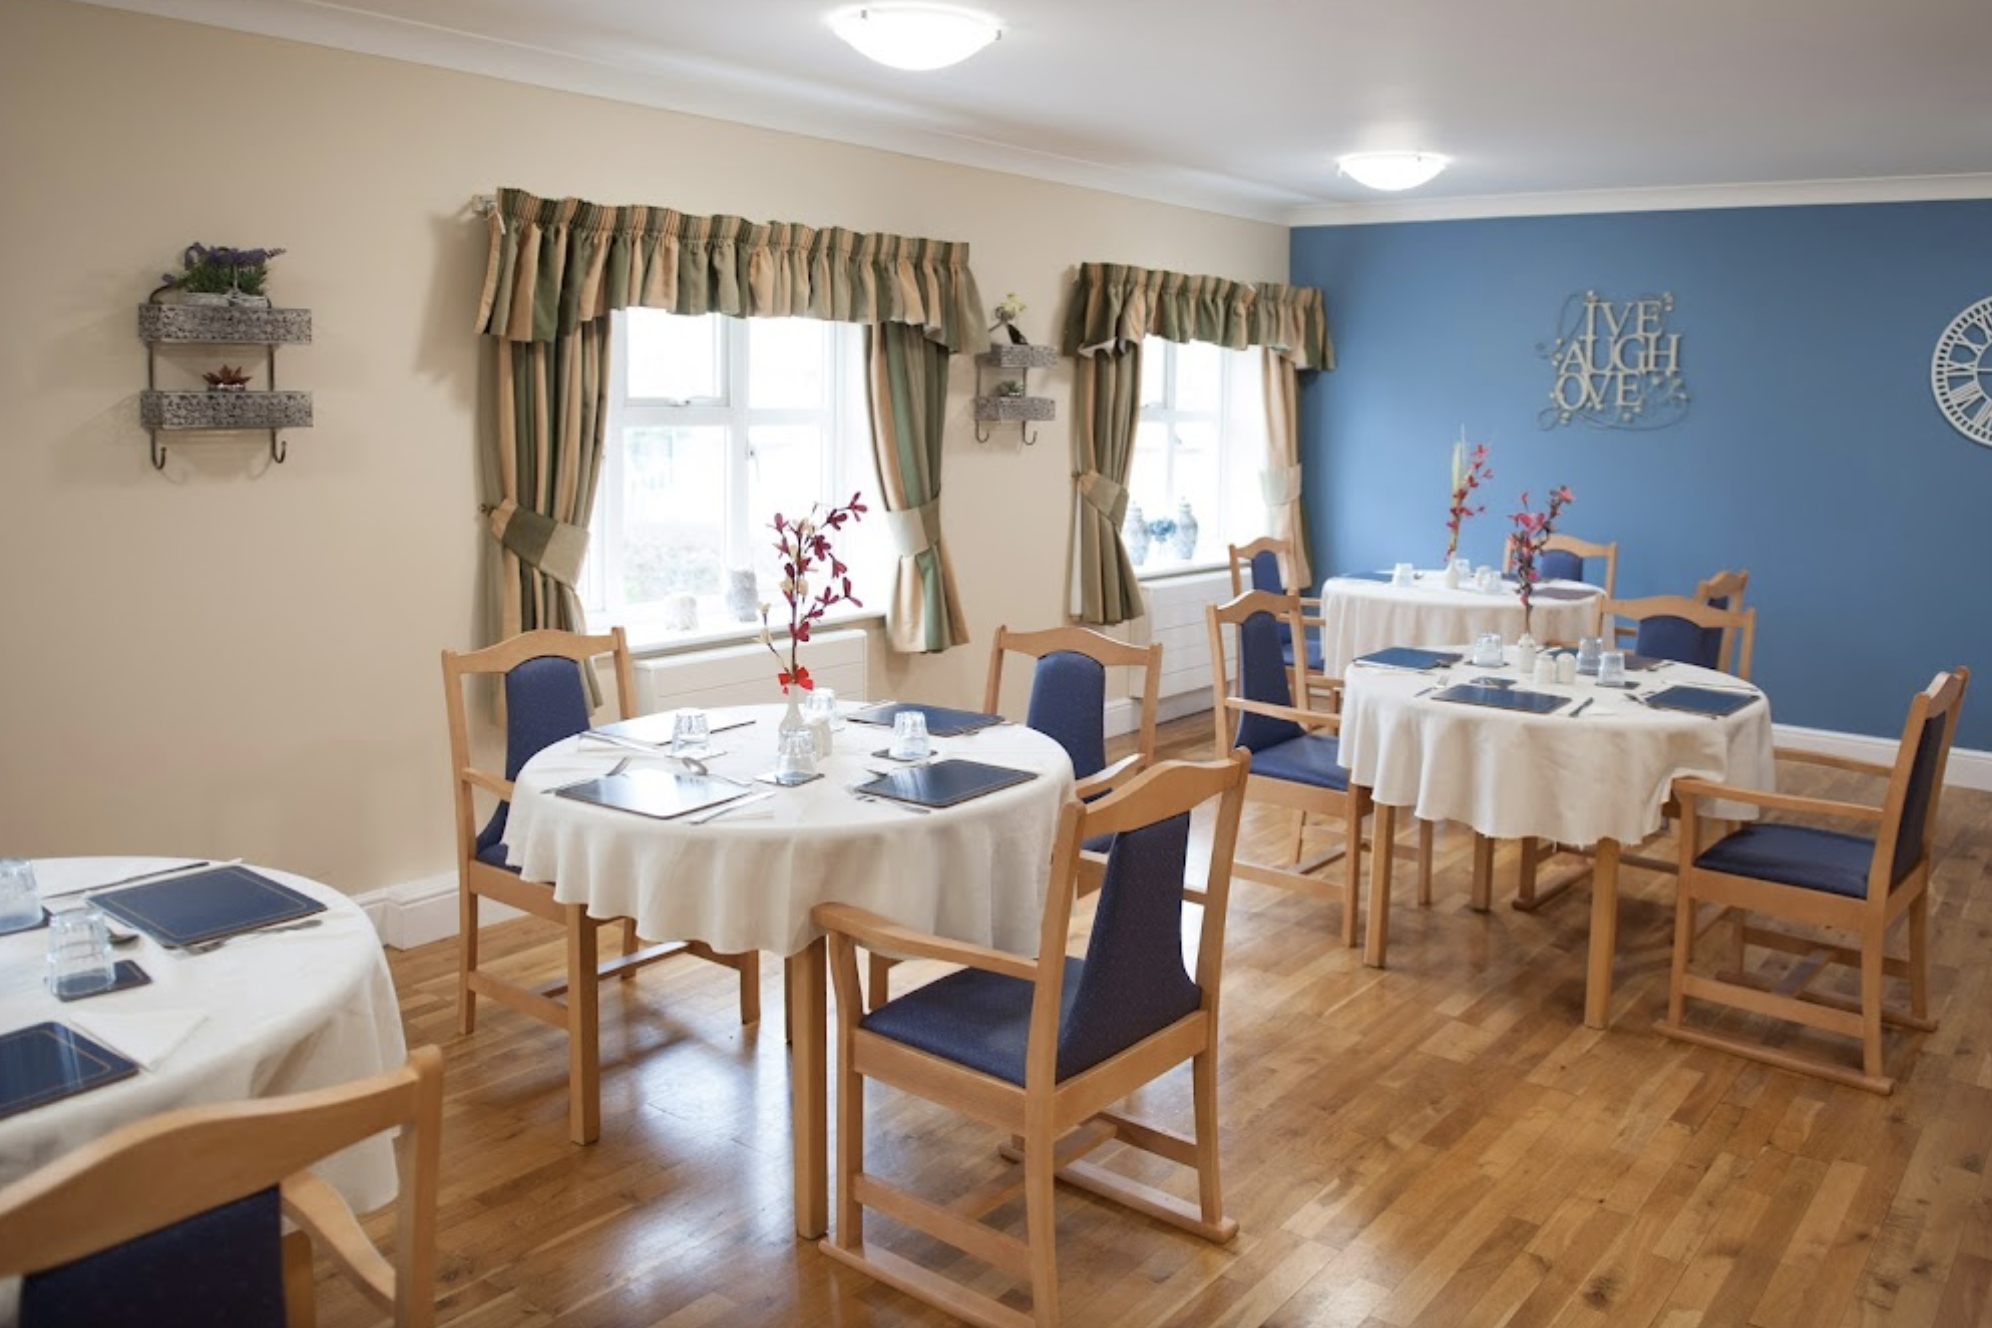 Bupa - St Marks care home 4